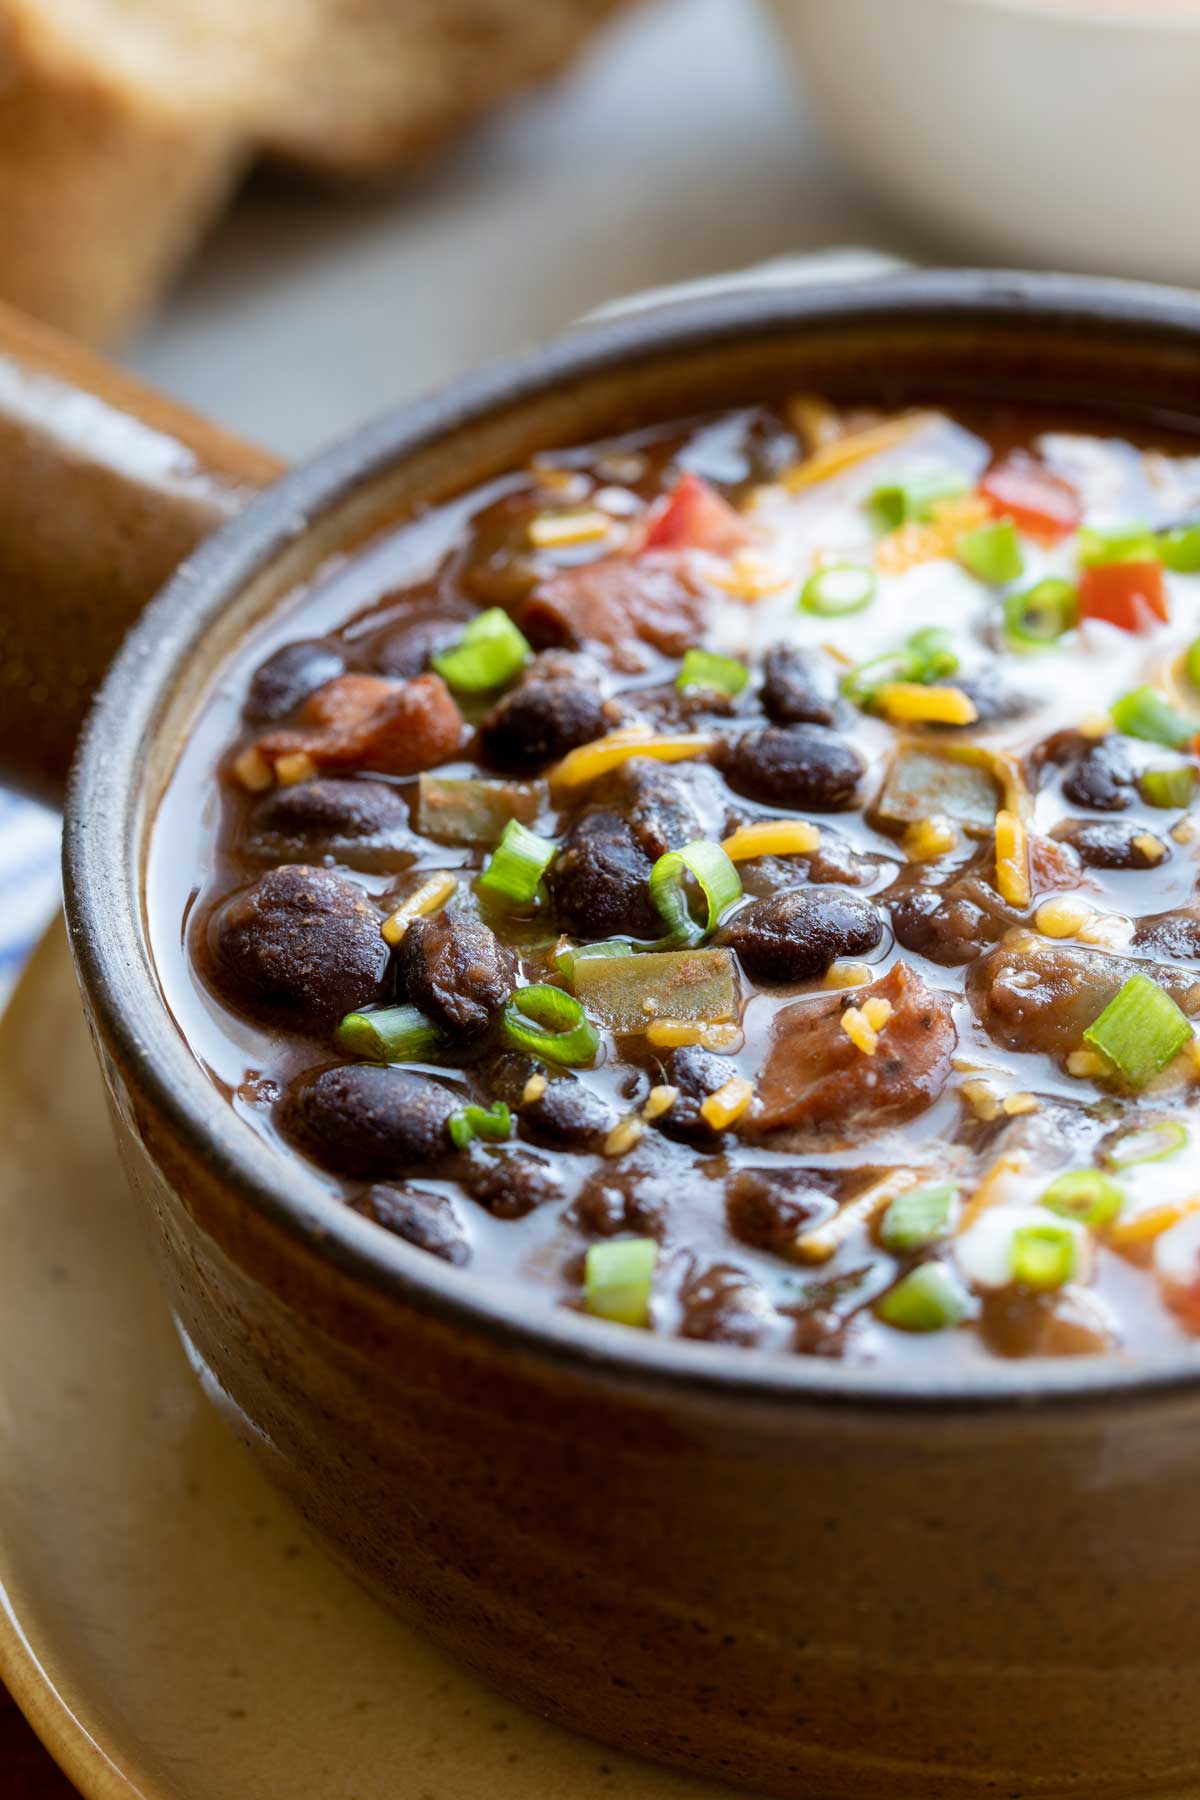 Closeup of soup served in crockery bowl, so you can really see the texture of the black beans and sausage.